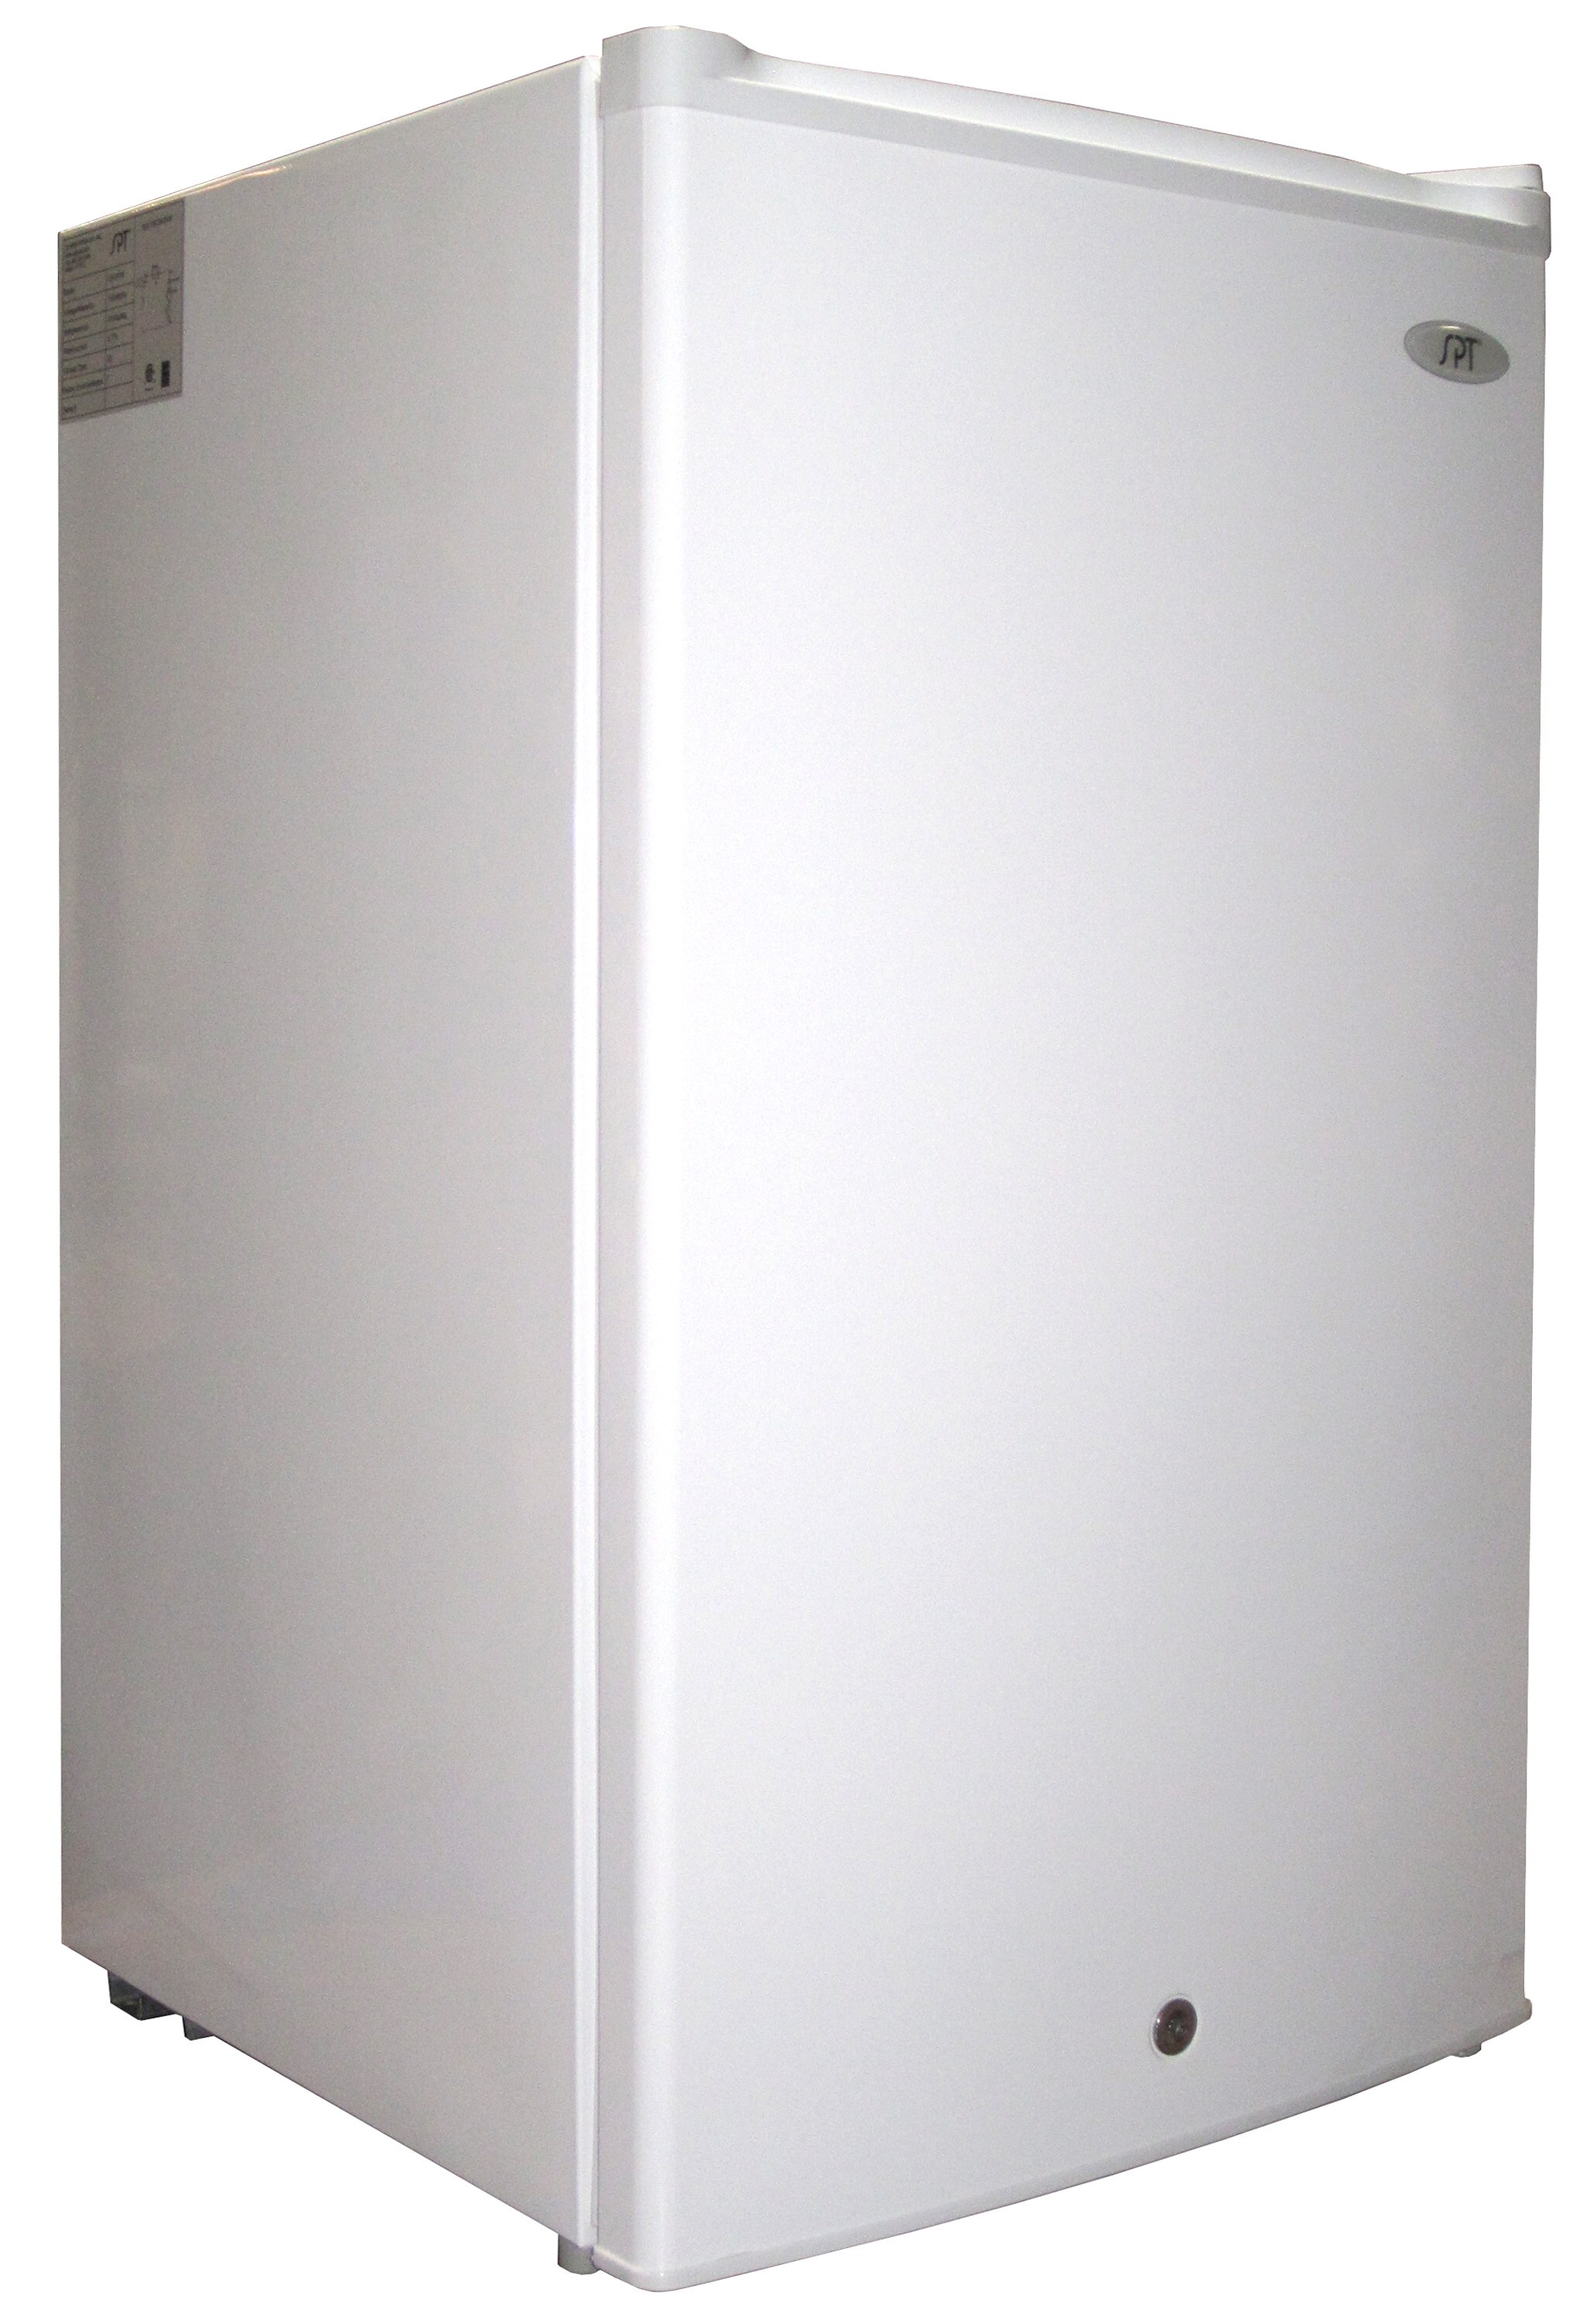 Details about   UPRIGHT FREEZER Small Mini 3 Cu Ft Shelves White 